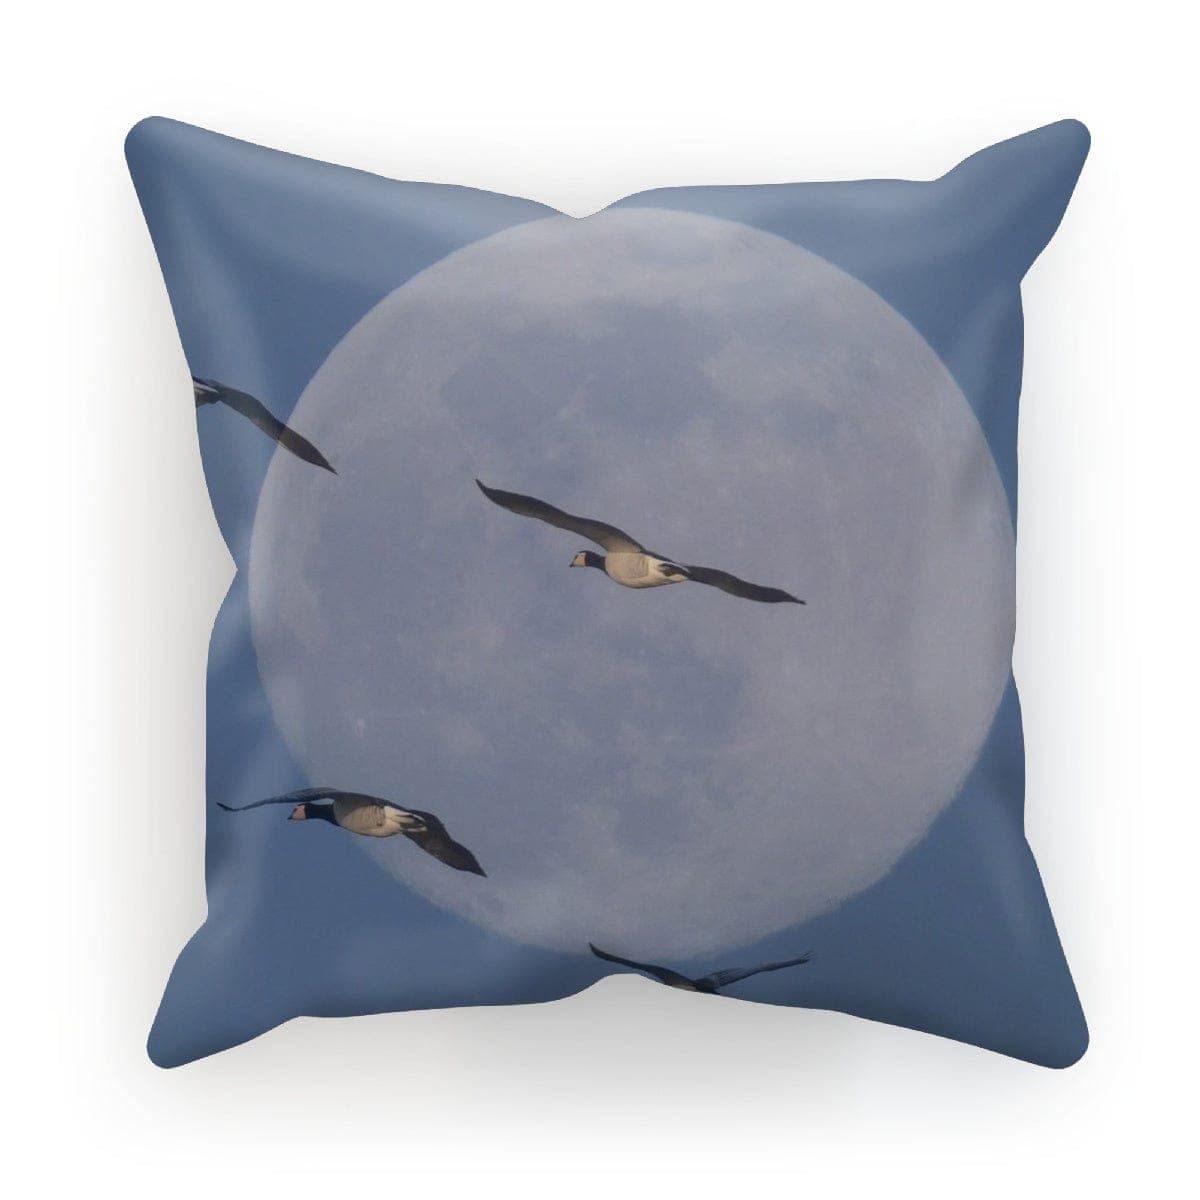 Fly me to the moon,  Art on a Cushion by Sensus Studio